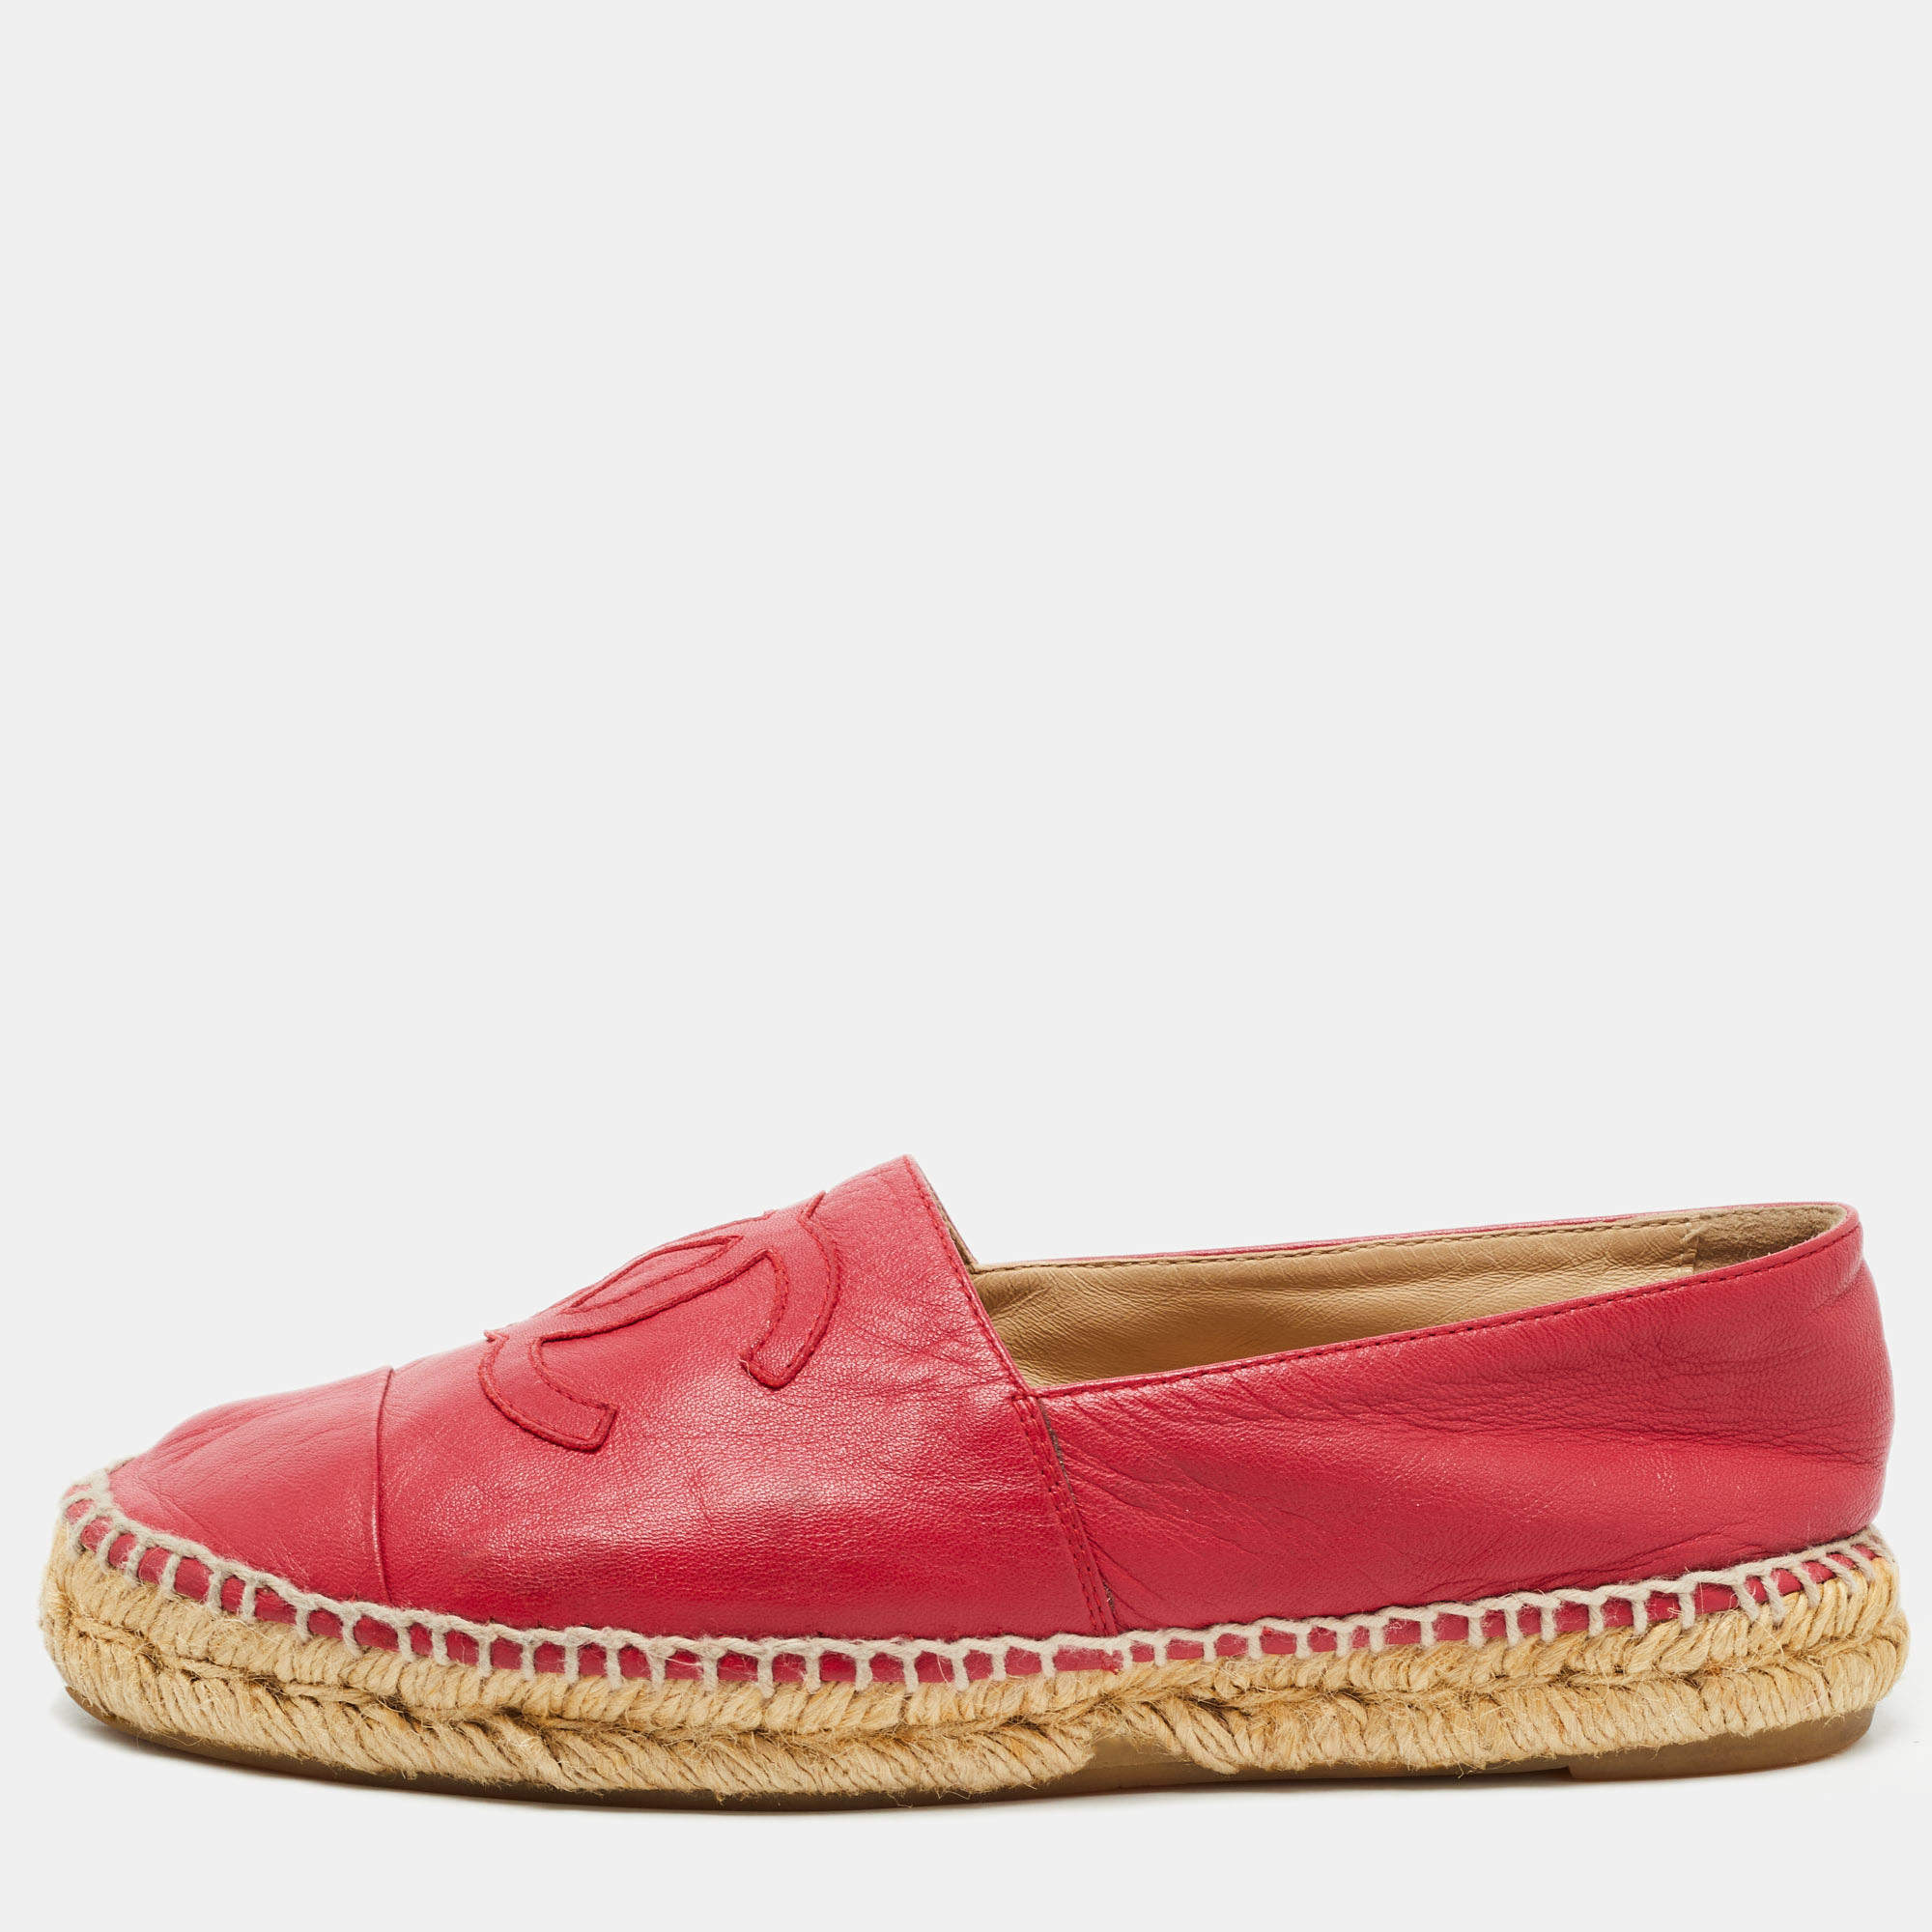 Chanel Pink Leather CC Espadrille Flats Size 38